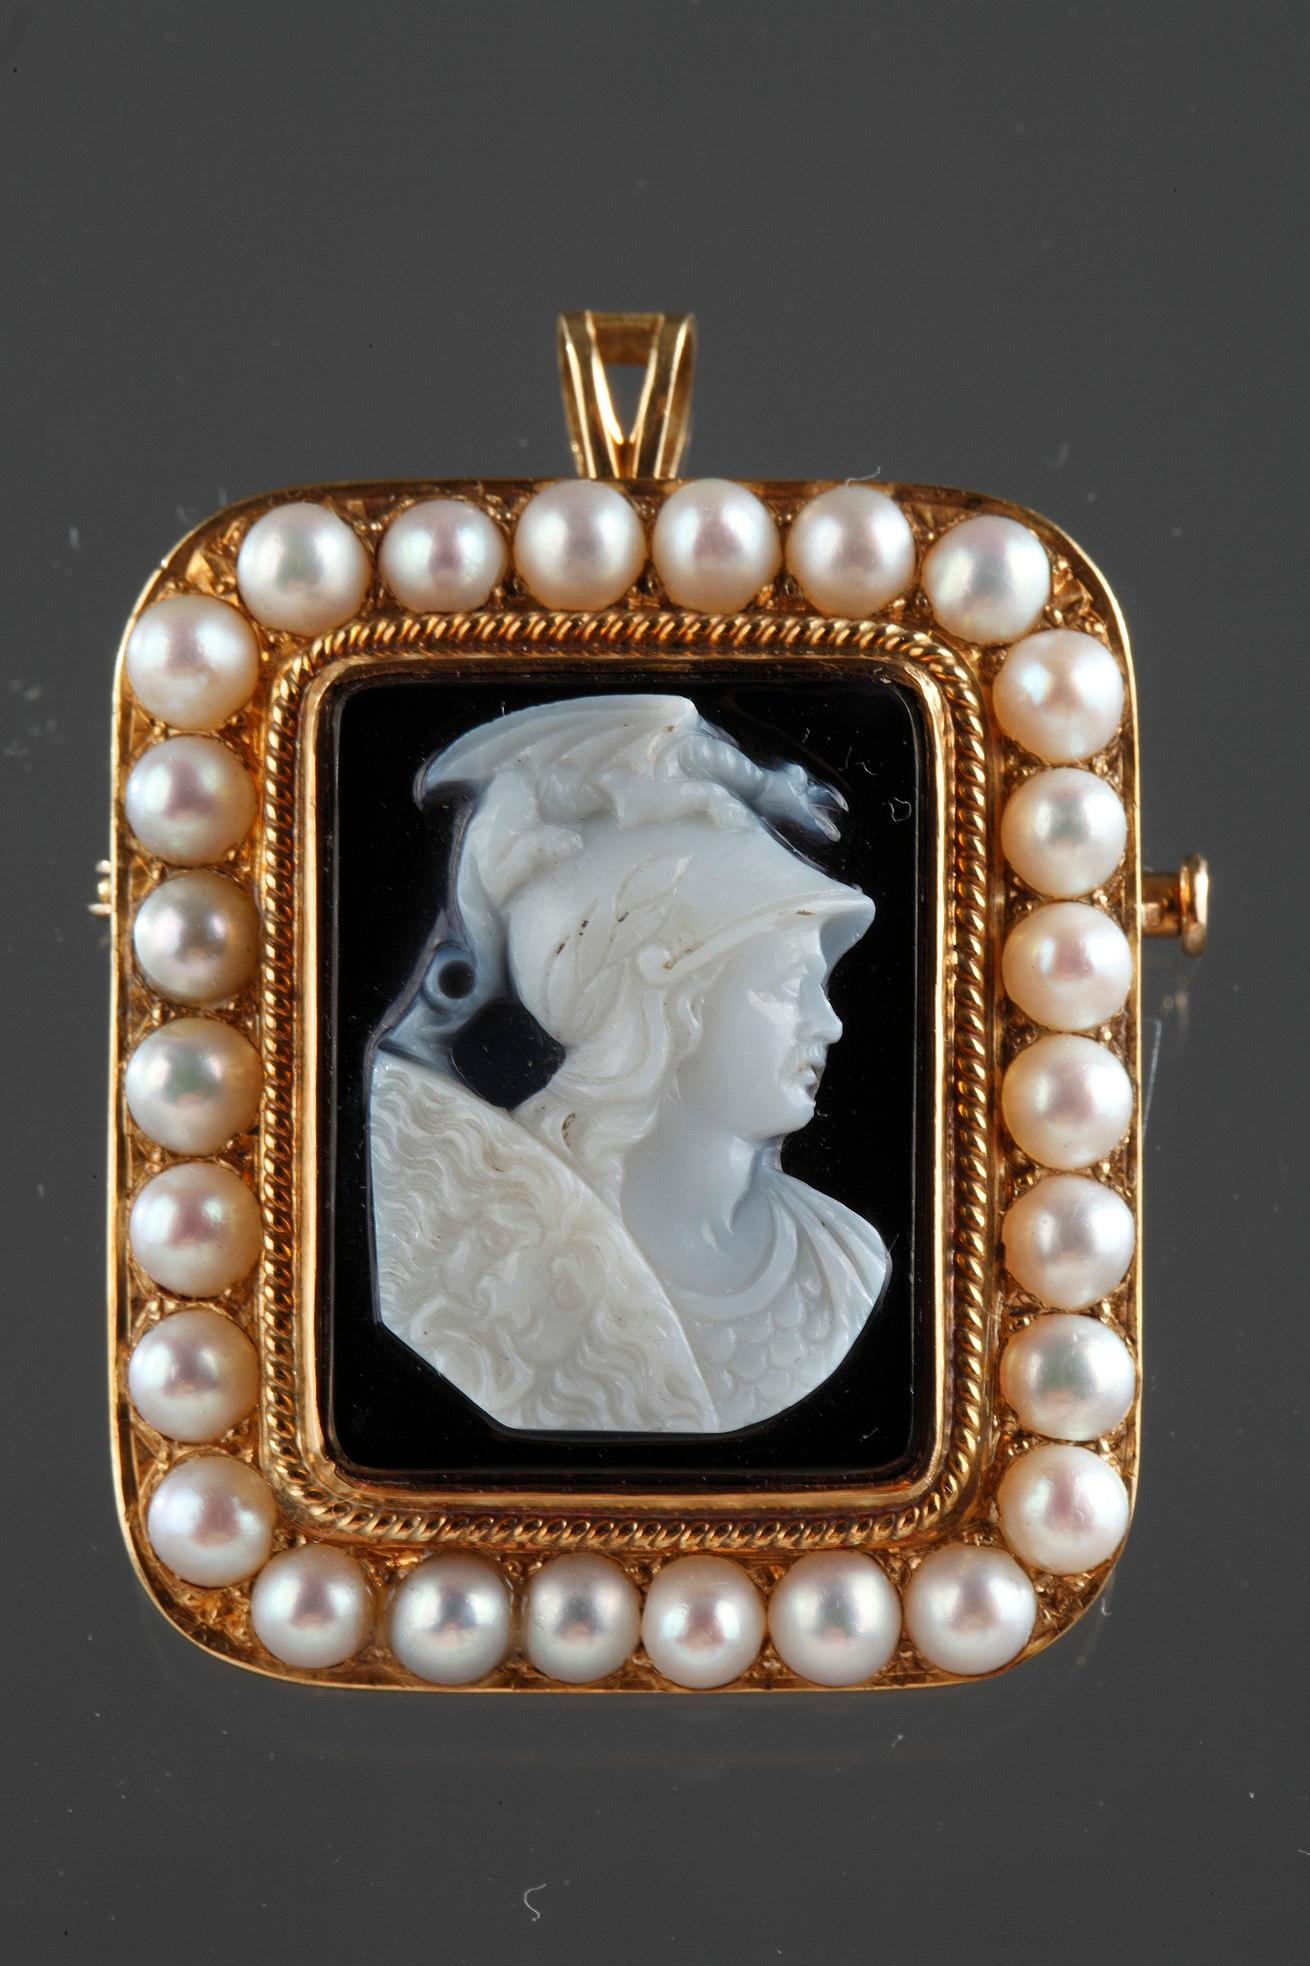 Brown agate cameo featuring a young man wearing a helmet and looking toward the right. The artist intricately sculpted the white vein of the agate to bring the delicate profile to life. The character portrayed is Perseus, wearing his helmet with a